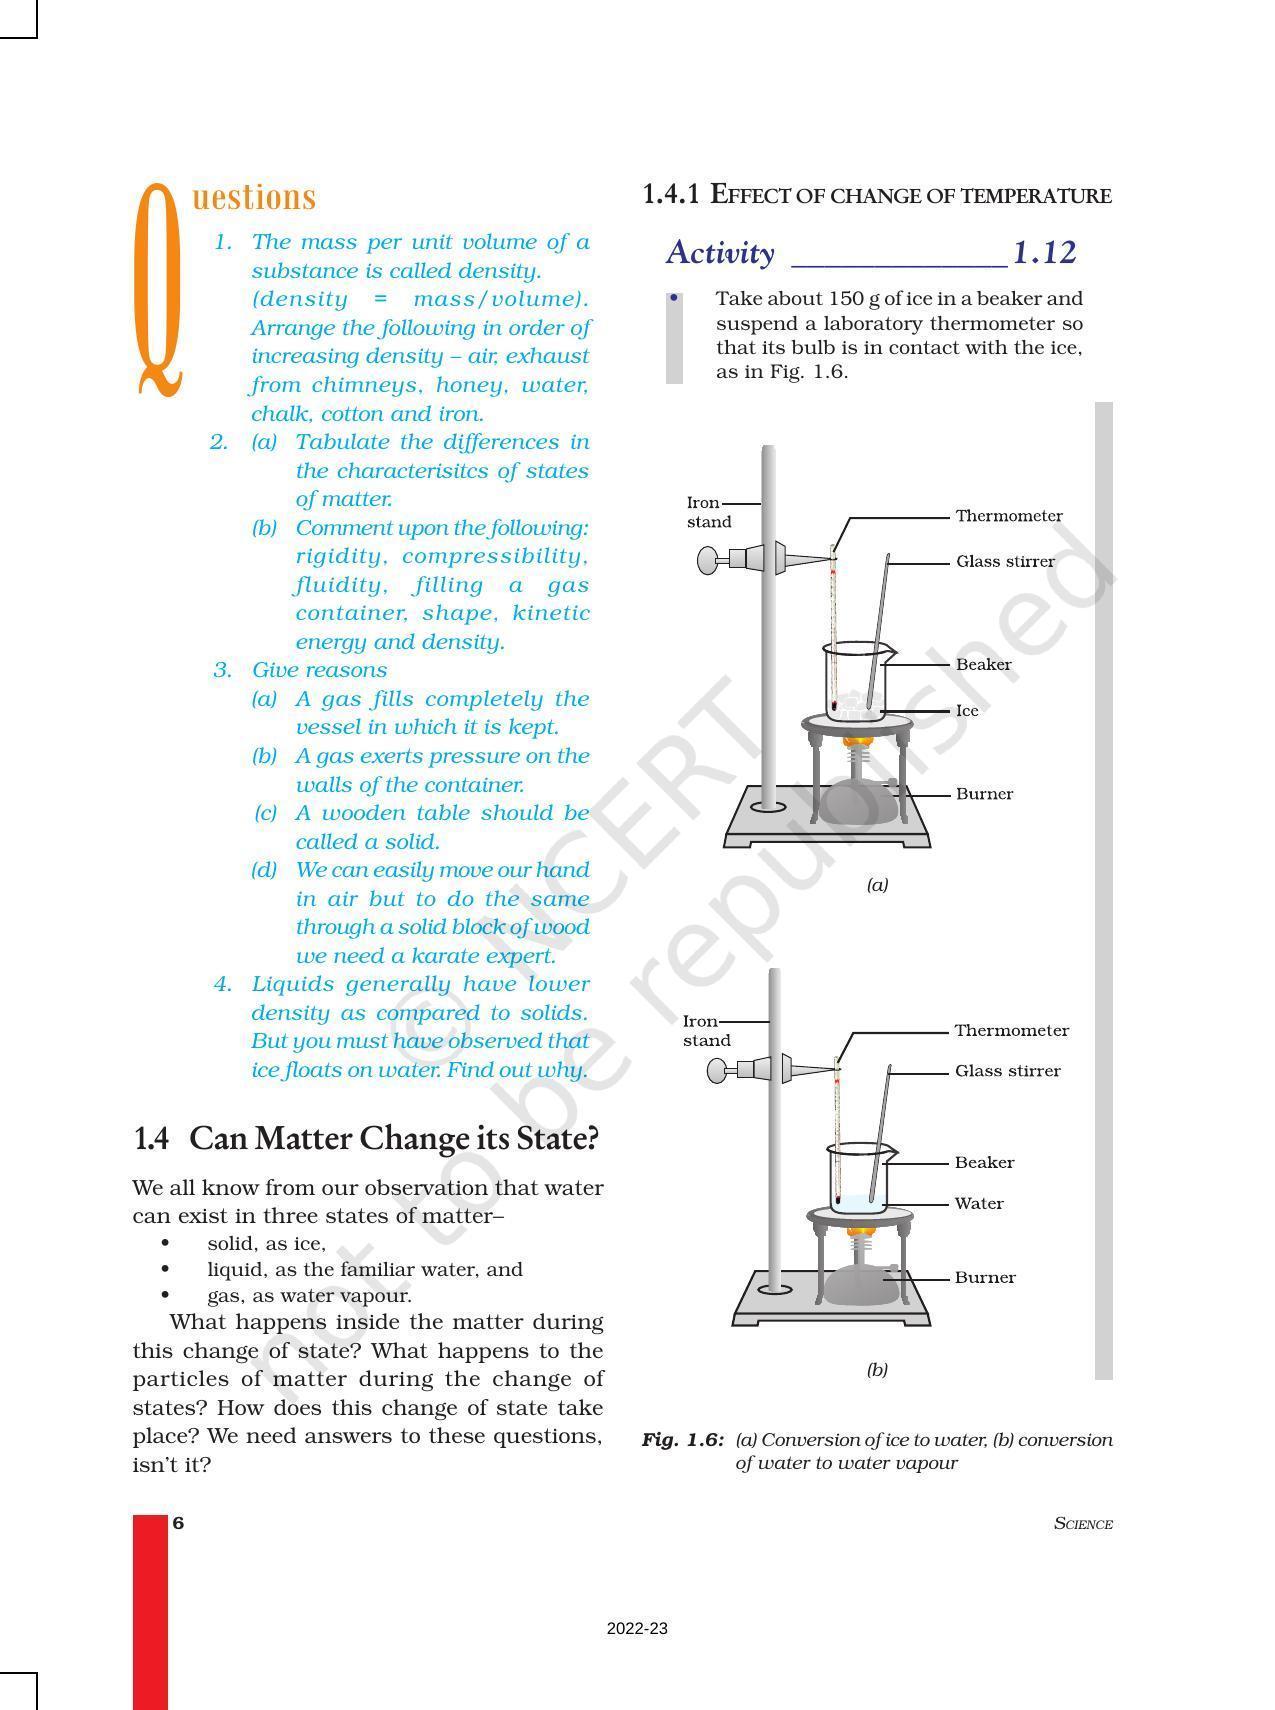 NCERT Book for Class 9 Science Chapter 1 Matter in Our Surroundings - Page 6